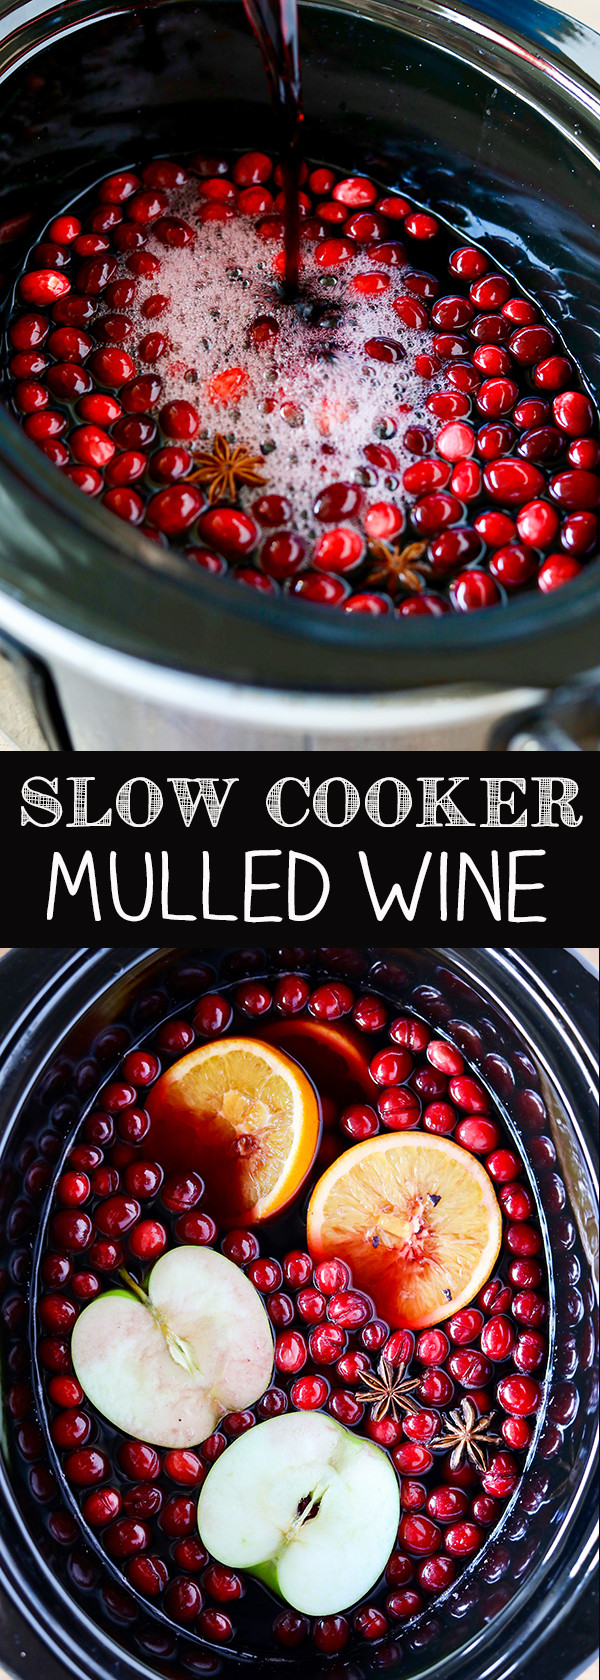 Mulled Wine Recipe Slow Cooker
 Slow Cooker Mulled Wine No 2 Pencil